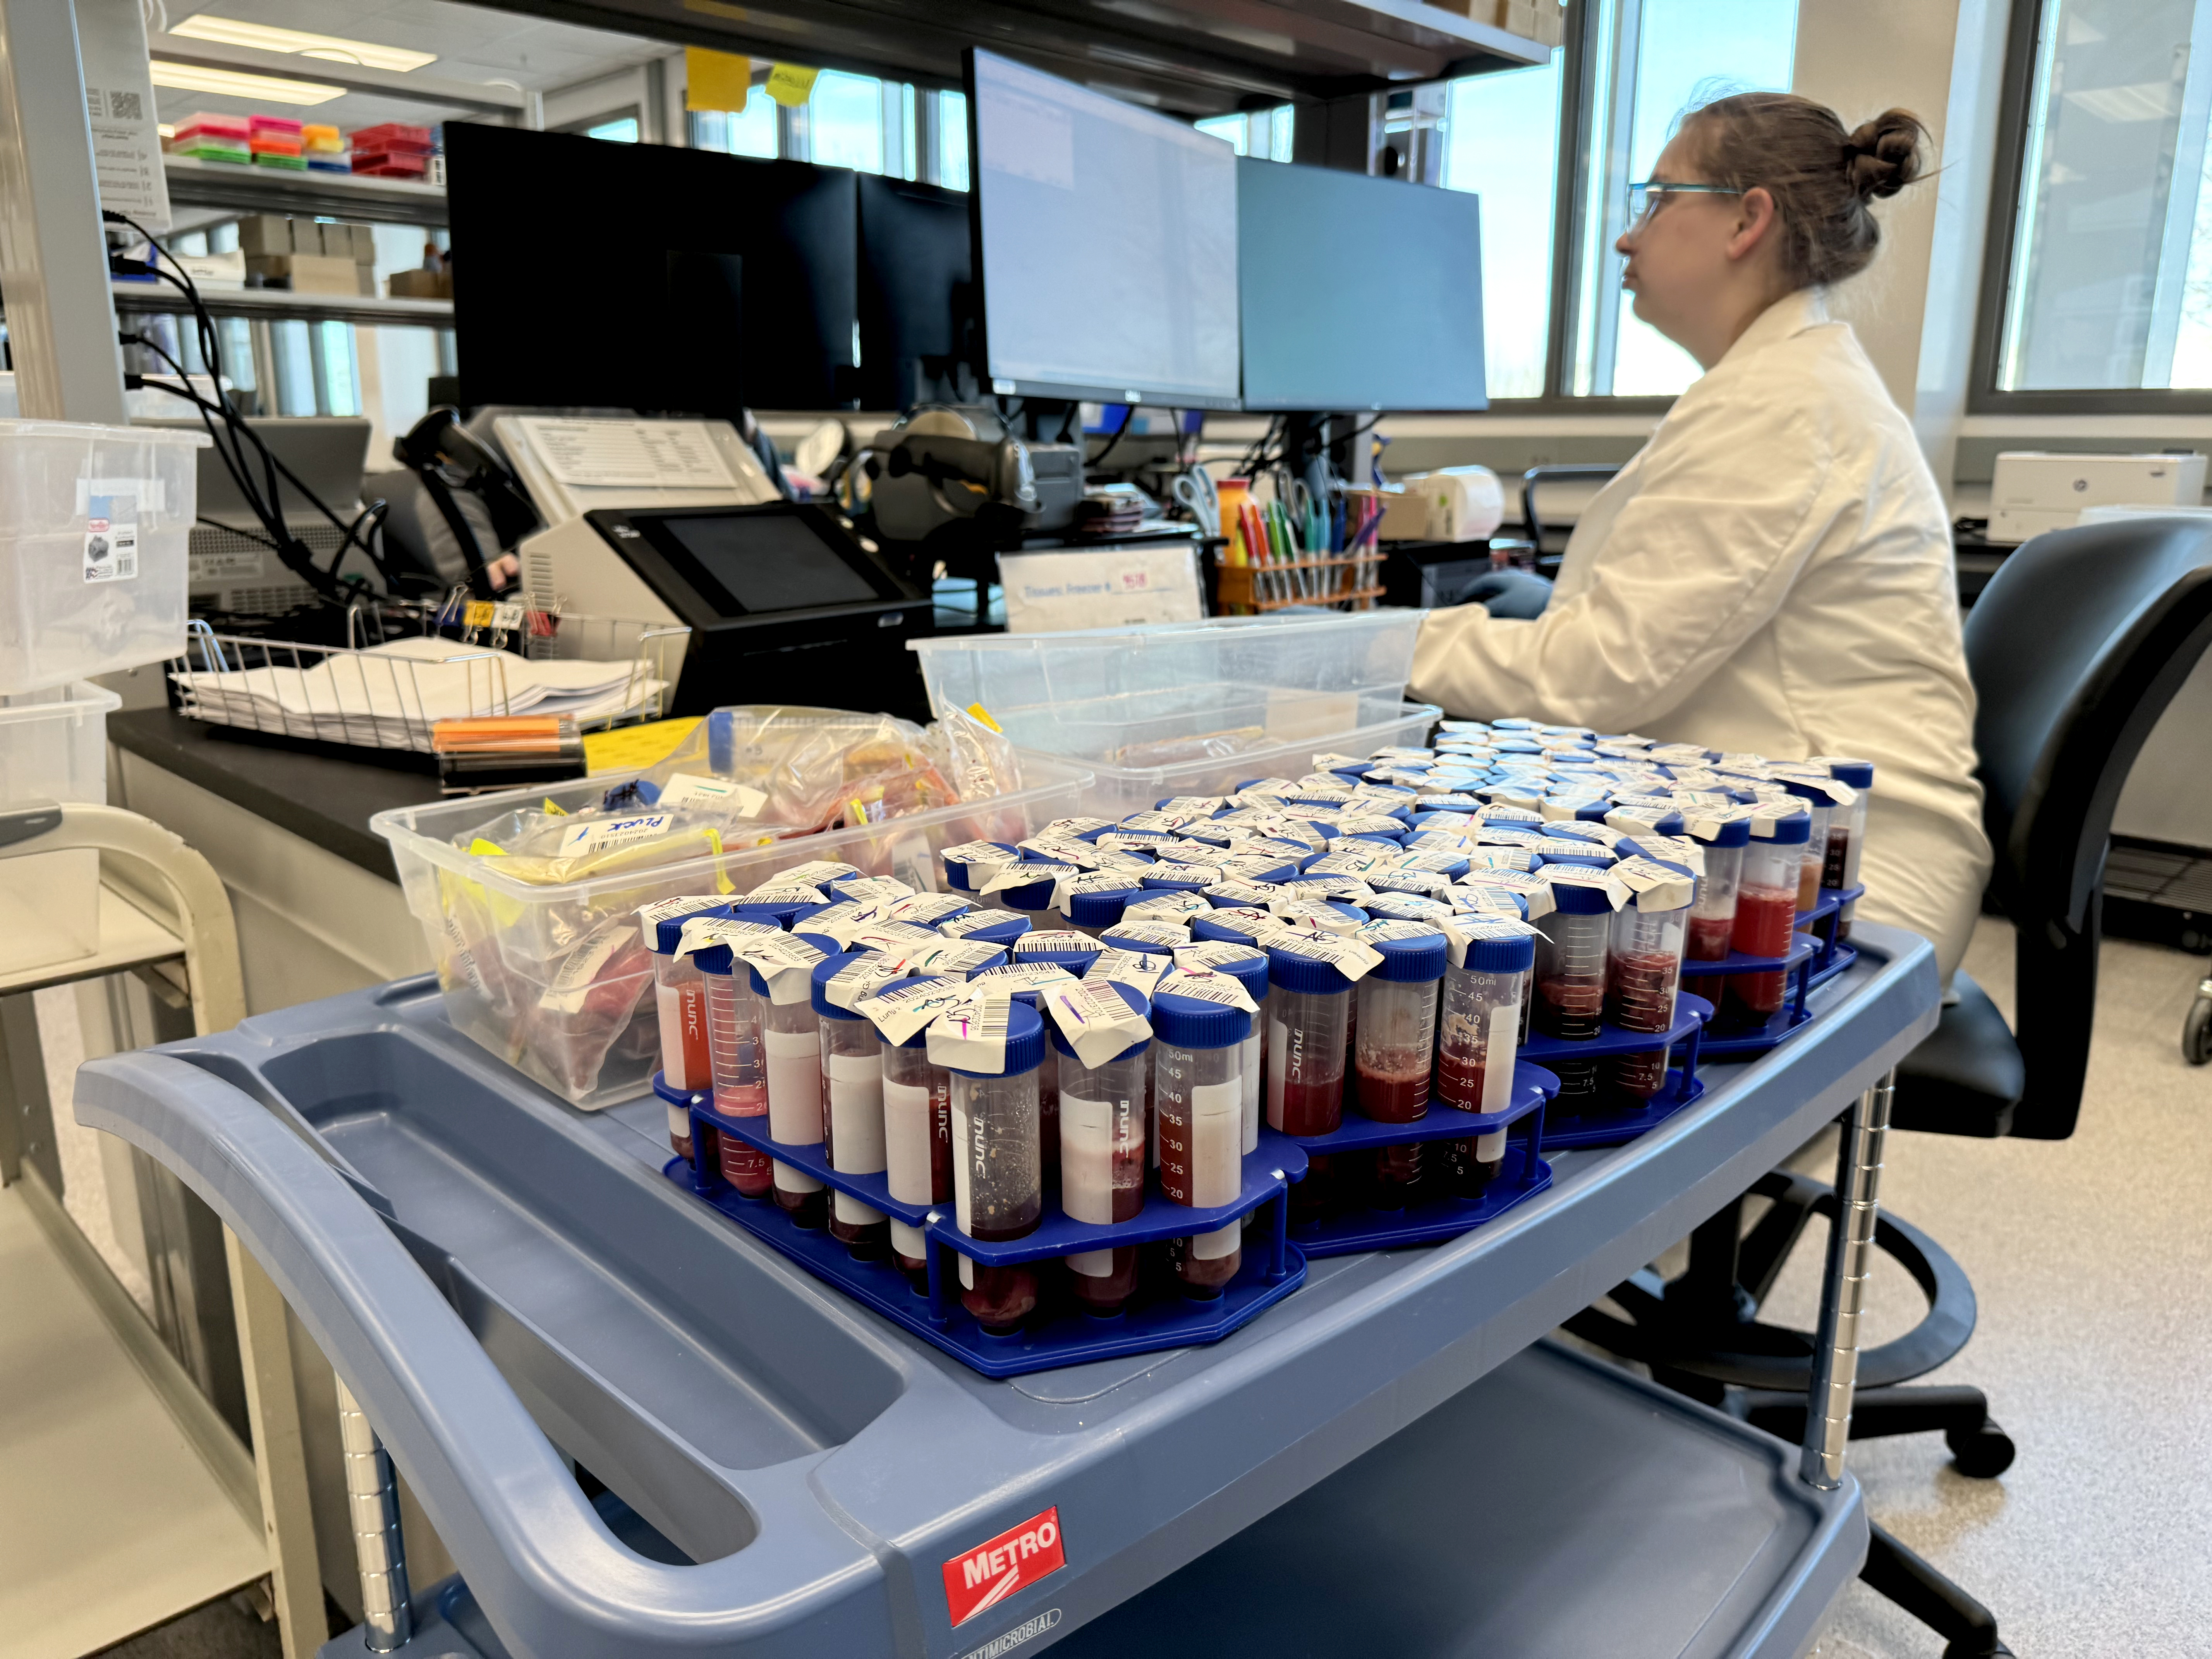 Cart contains dozen of animal fluid samples with labels on cover